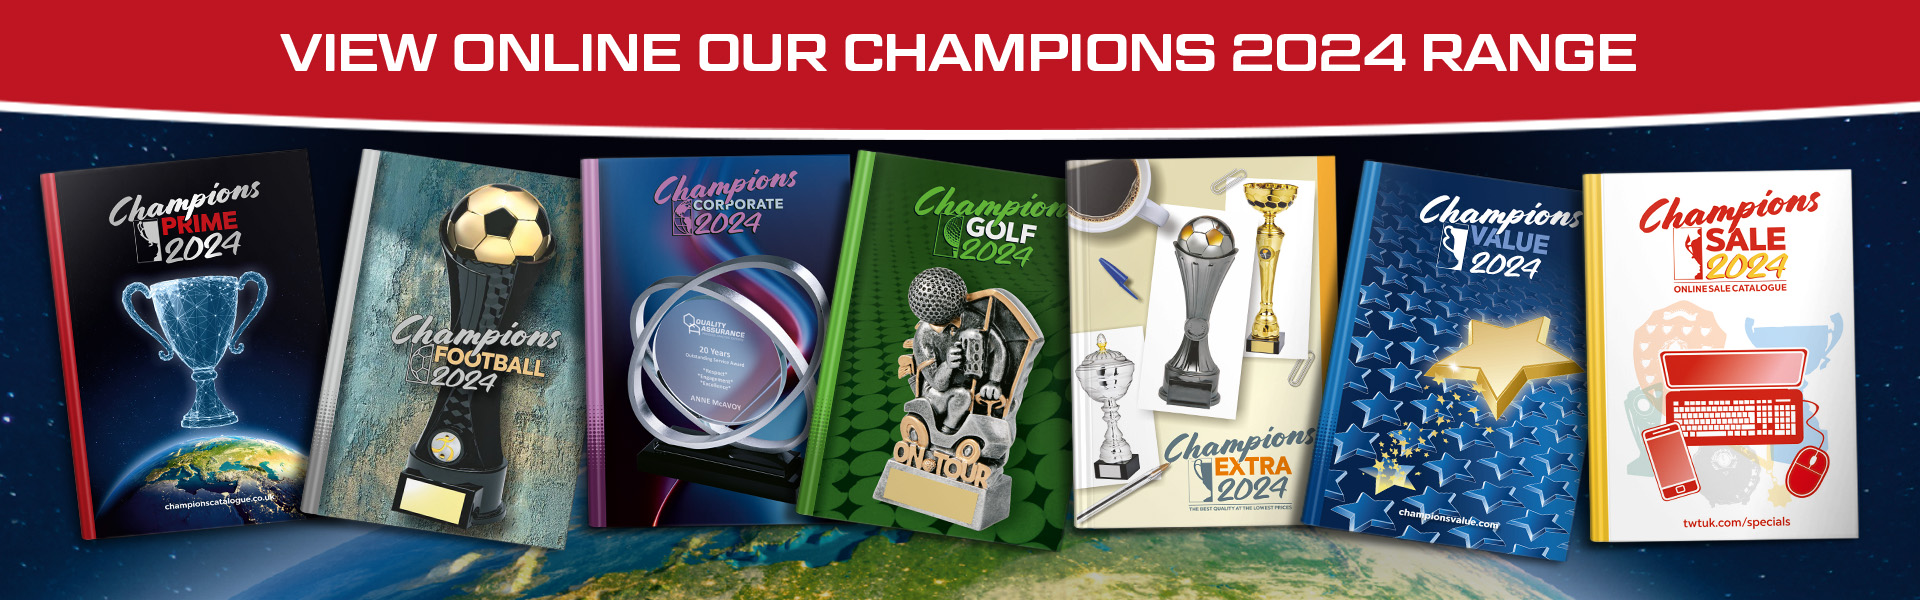 View Online Our Champions Range